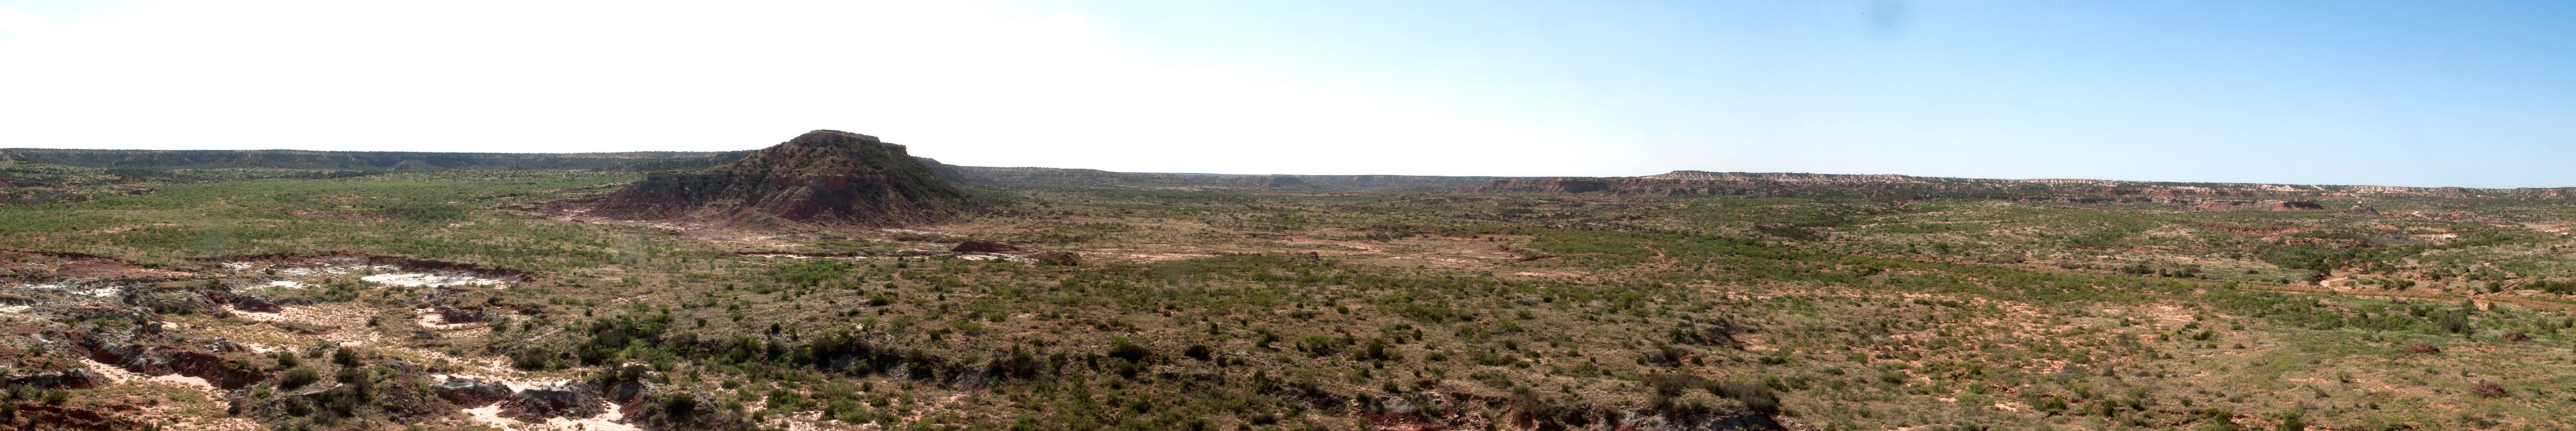 panoramic view of the landscape in Post